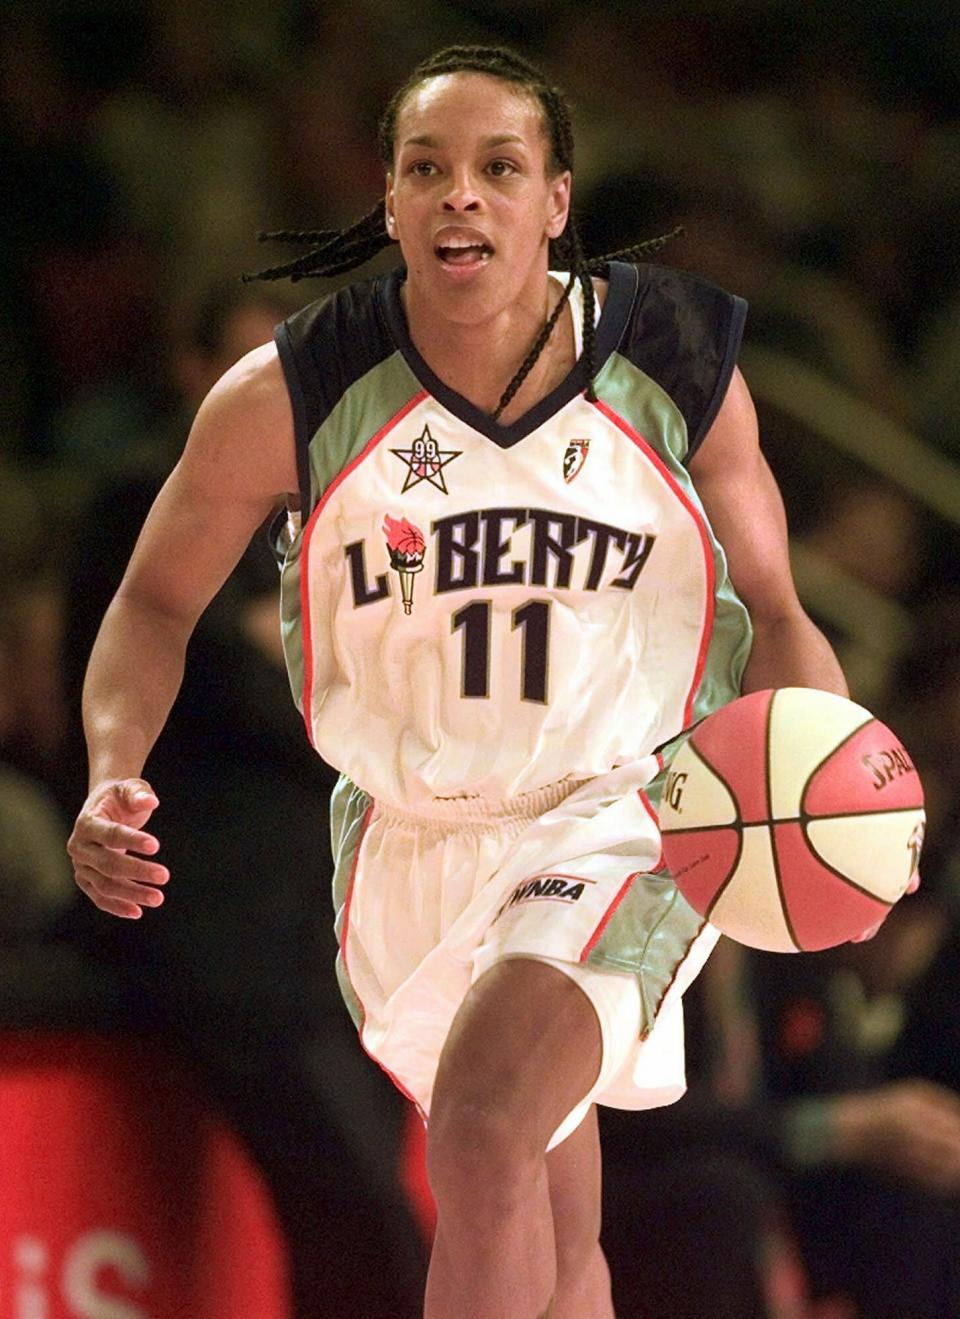 FILE - In this July 14, 1999, file photo, Eastern Conference's Teresa Weatherspoon, of the New York Liberty, drives down the court during the inaugural WNBA All-Star basketball game at New York's Madison Square Garden. The West defeated the East 79-61. Weatherspoon is among 13 finalists for enshrinement later this year into the Basketball Hall of Fame. (AP Photo/Kathy Willens, File)